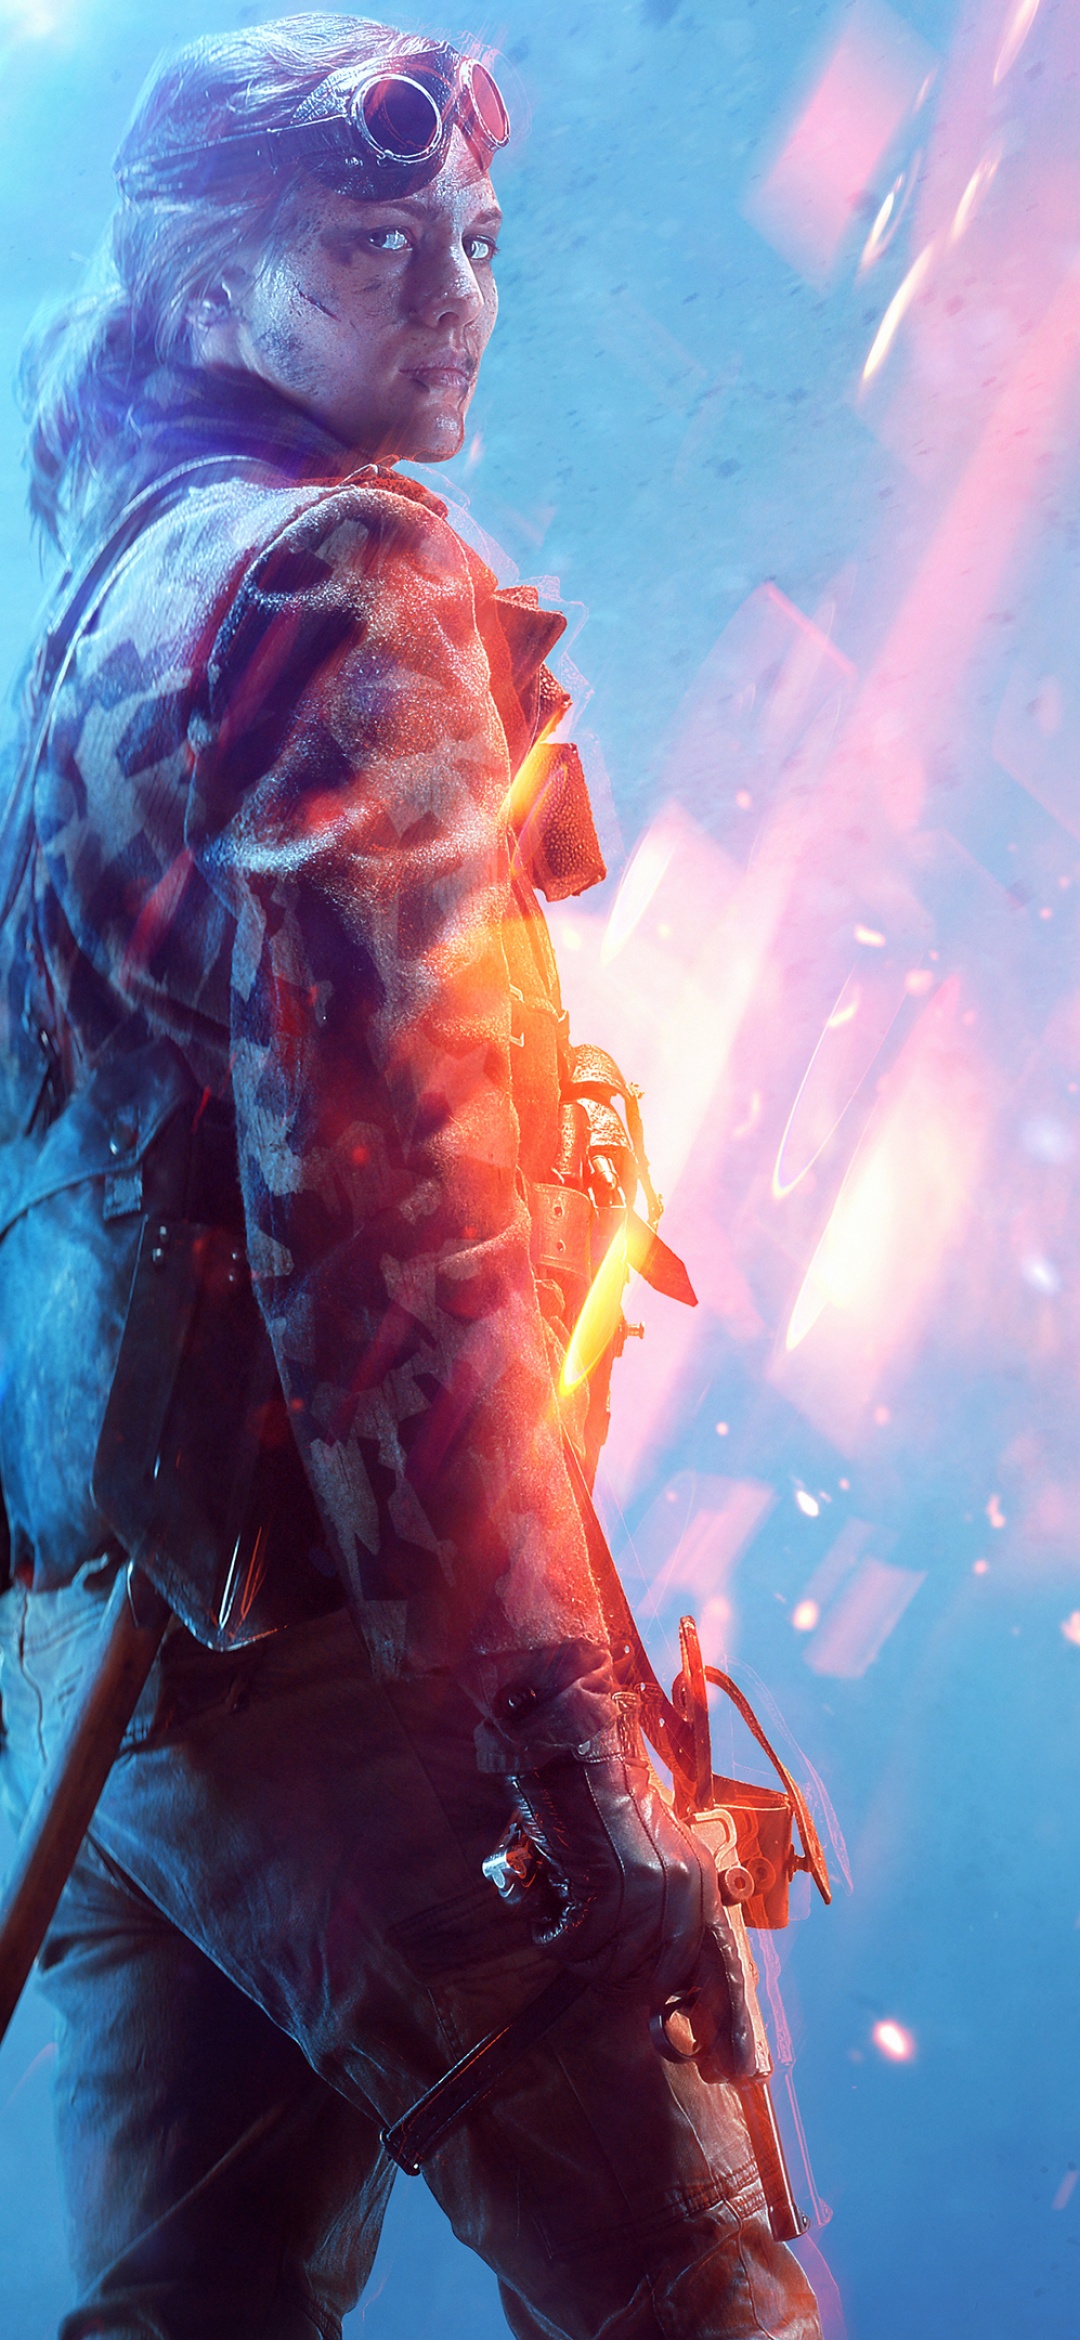 iphone xs battlefield v wallpapers